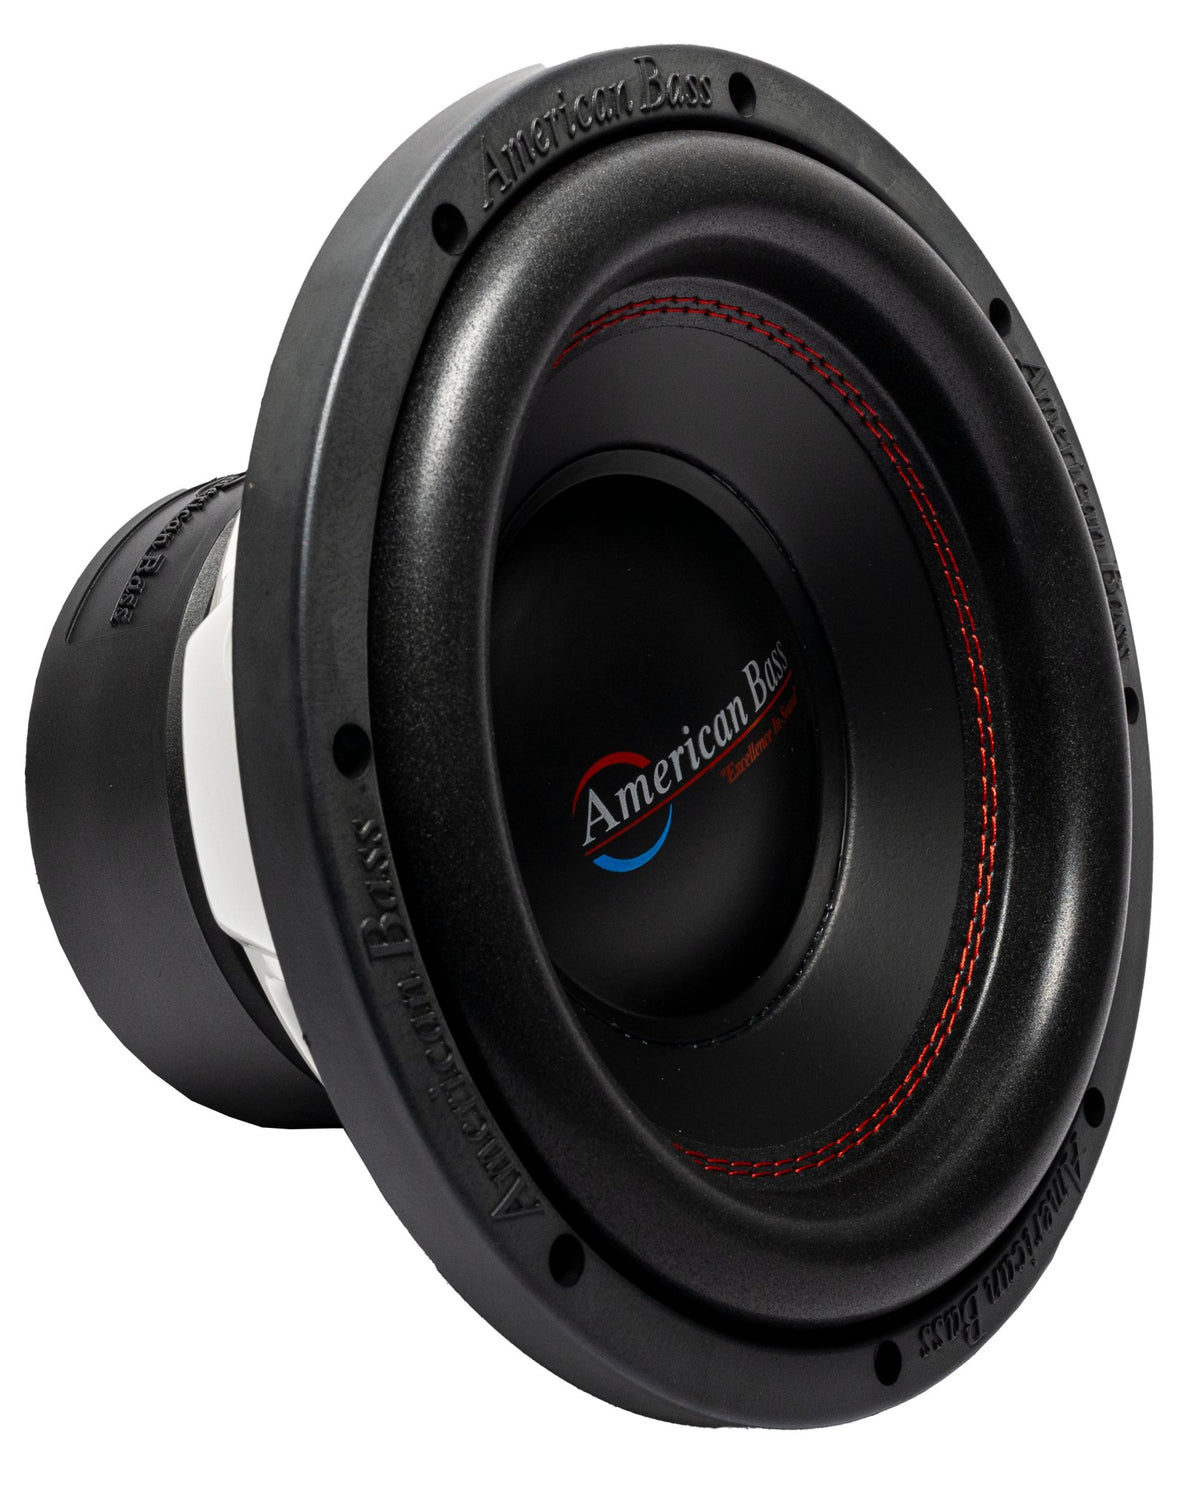 DX 10" Subwoofer - American Bass Audio